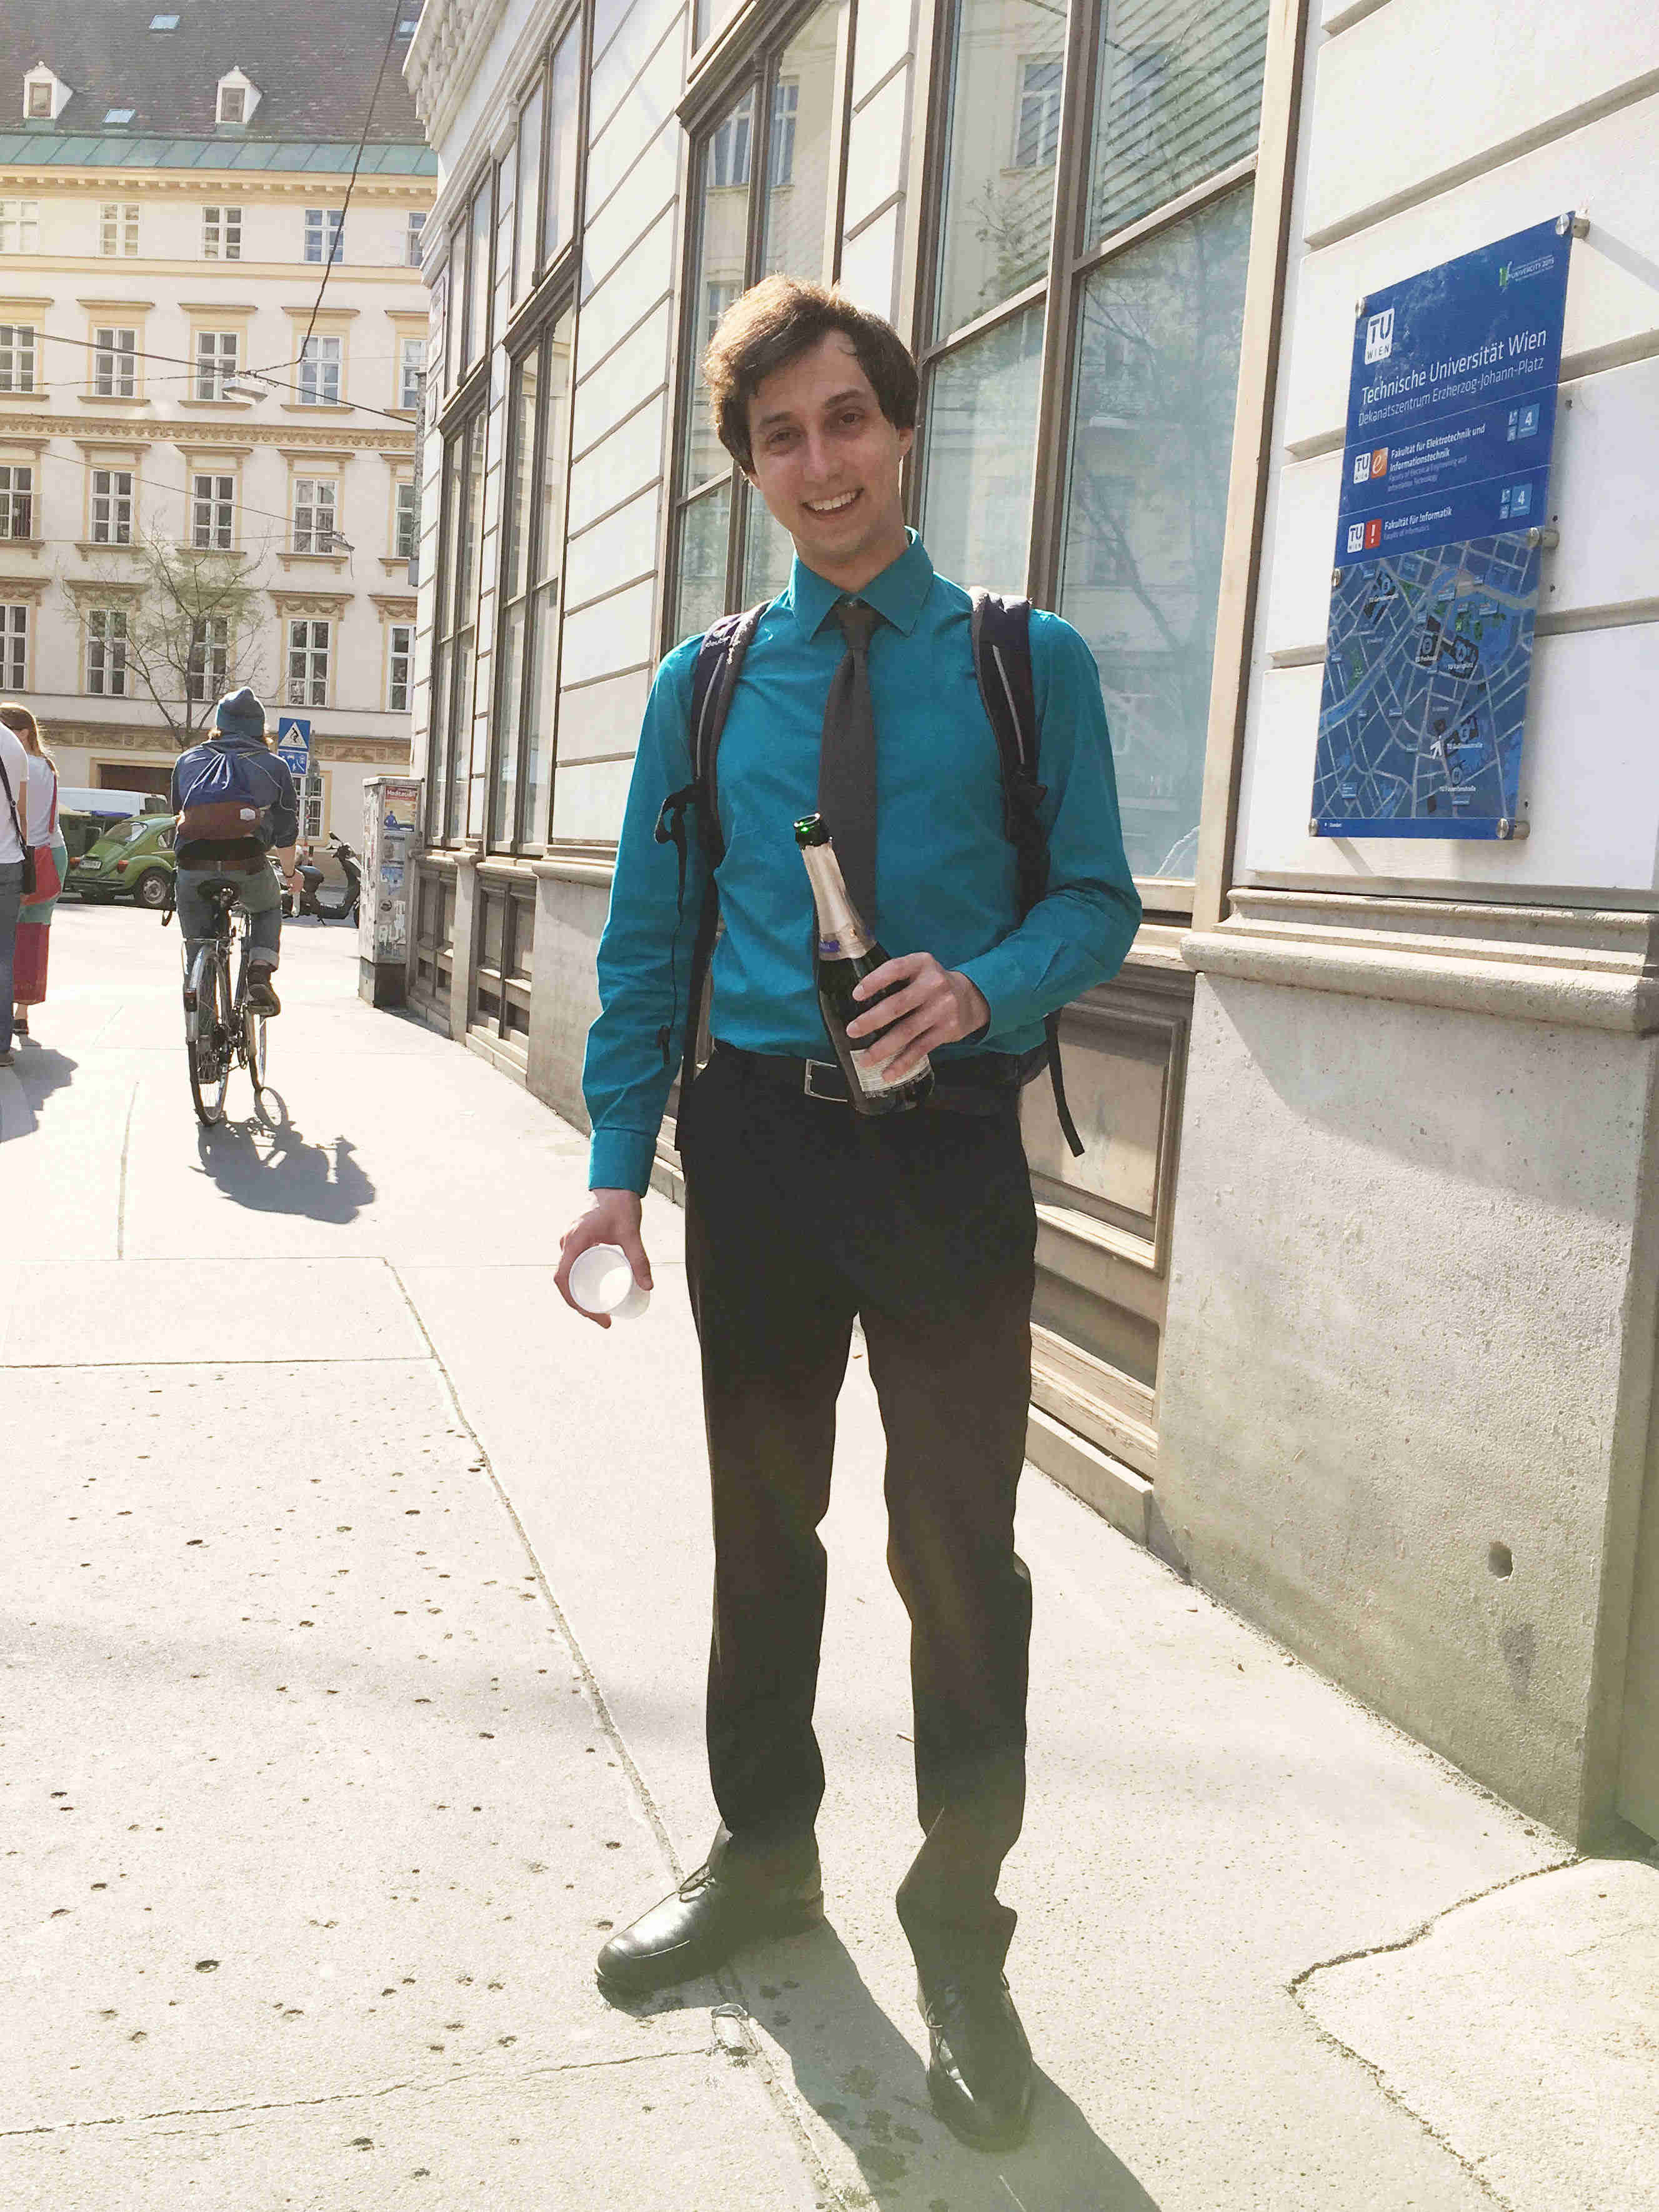 Image of a researcher in shirt and tie holding a champagne bottle in front of a university building.